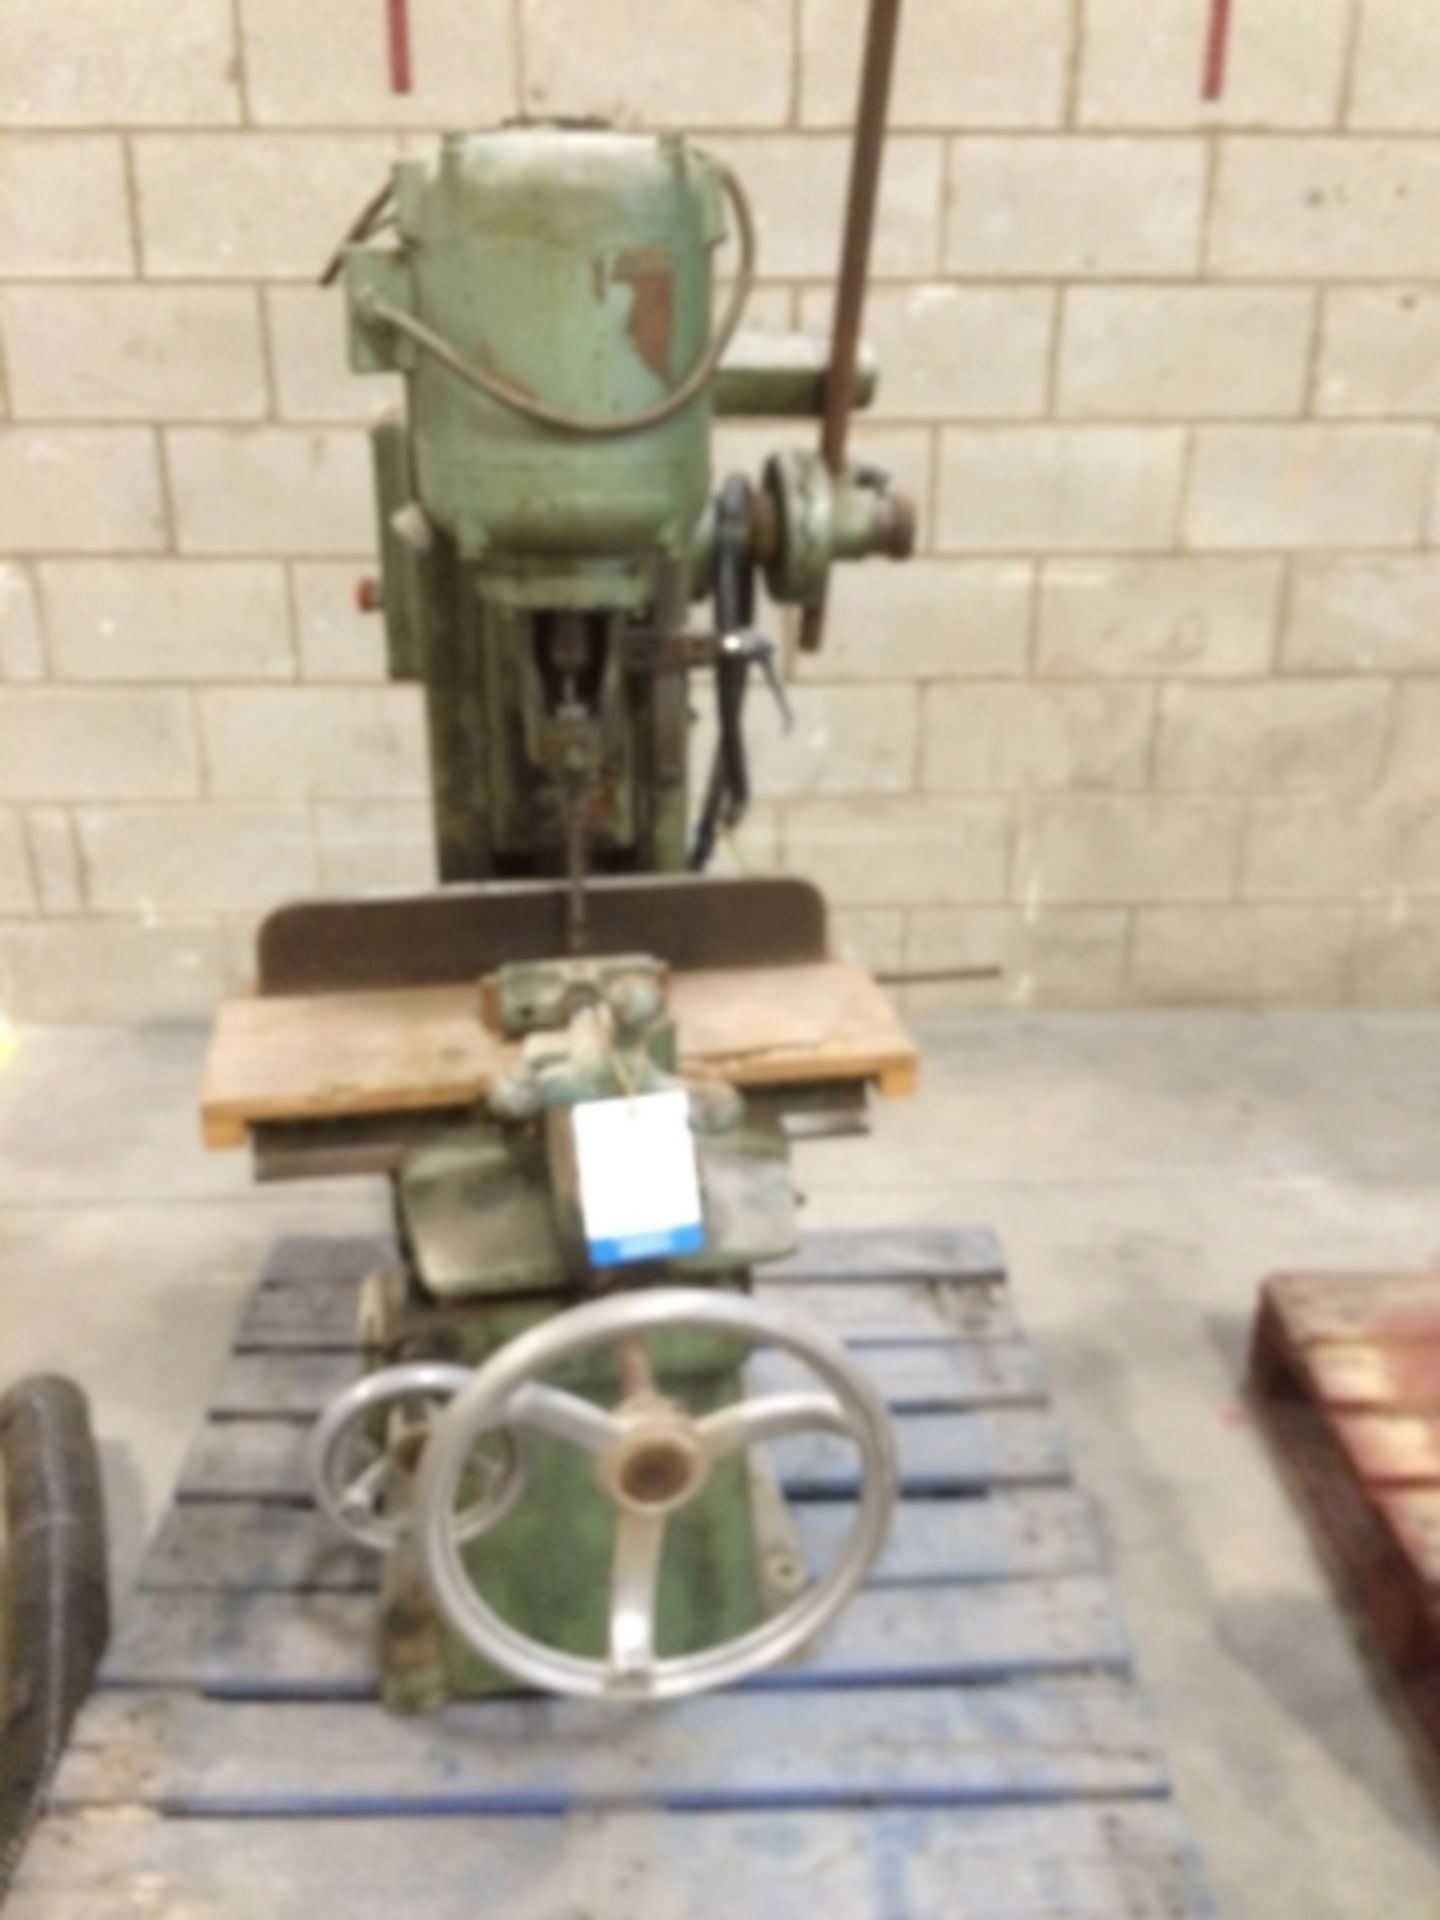 * Wilson HFE 5339 Chisel Morticer and a Pedestal Drill. This lot is located at the former North